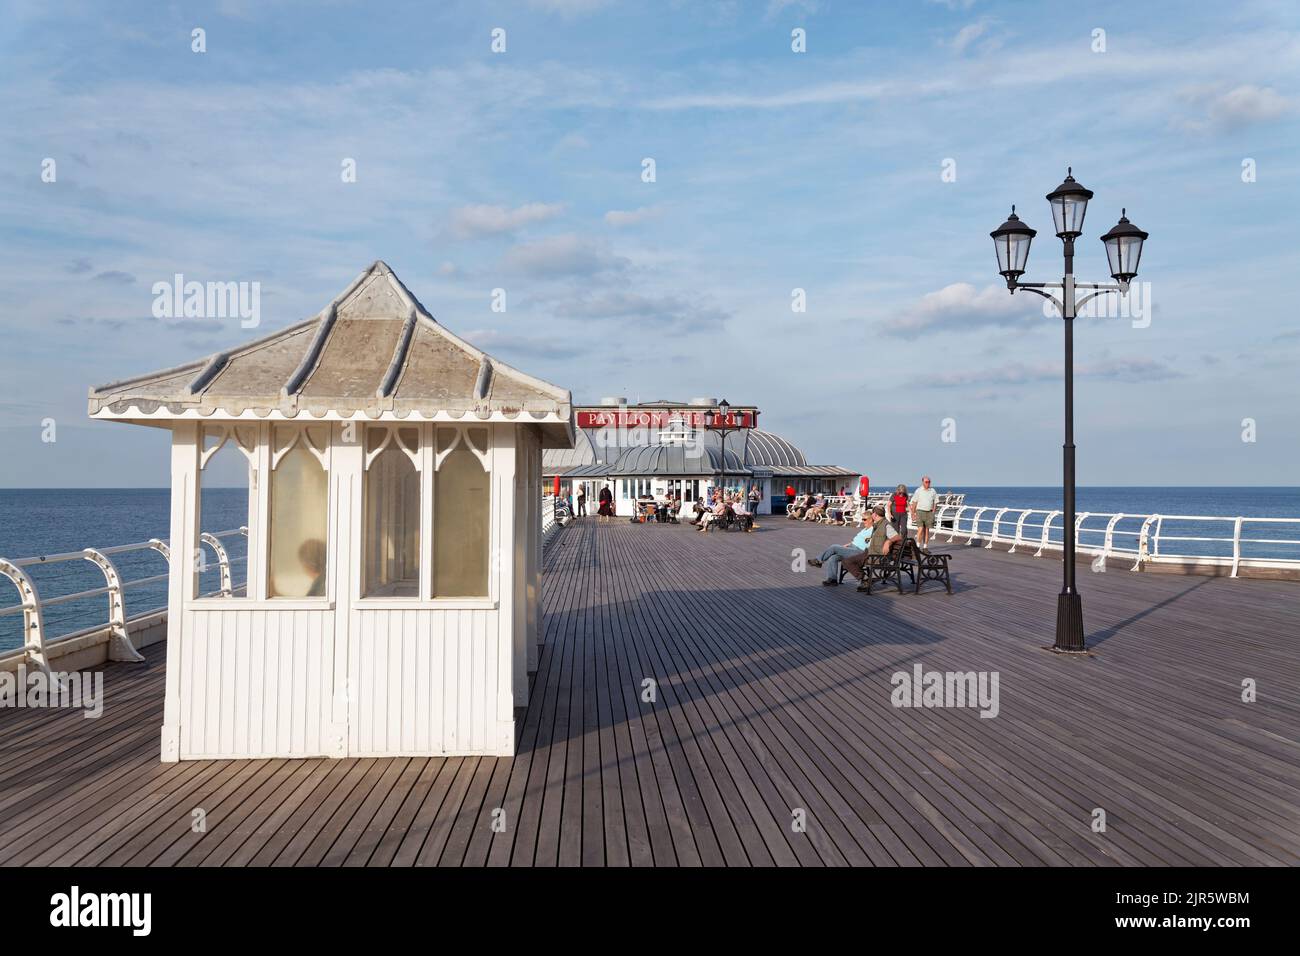 On Cromer Pier with shelter and lamp with the Pavilion theatre in the background Stock Photo